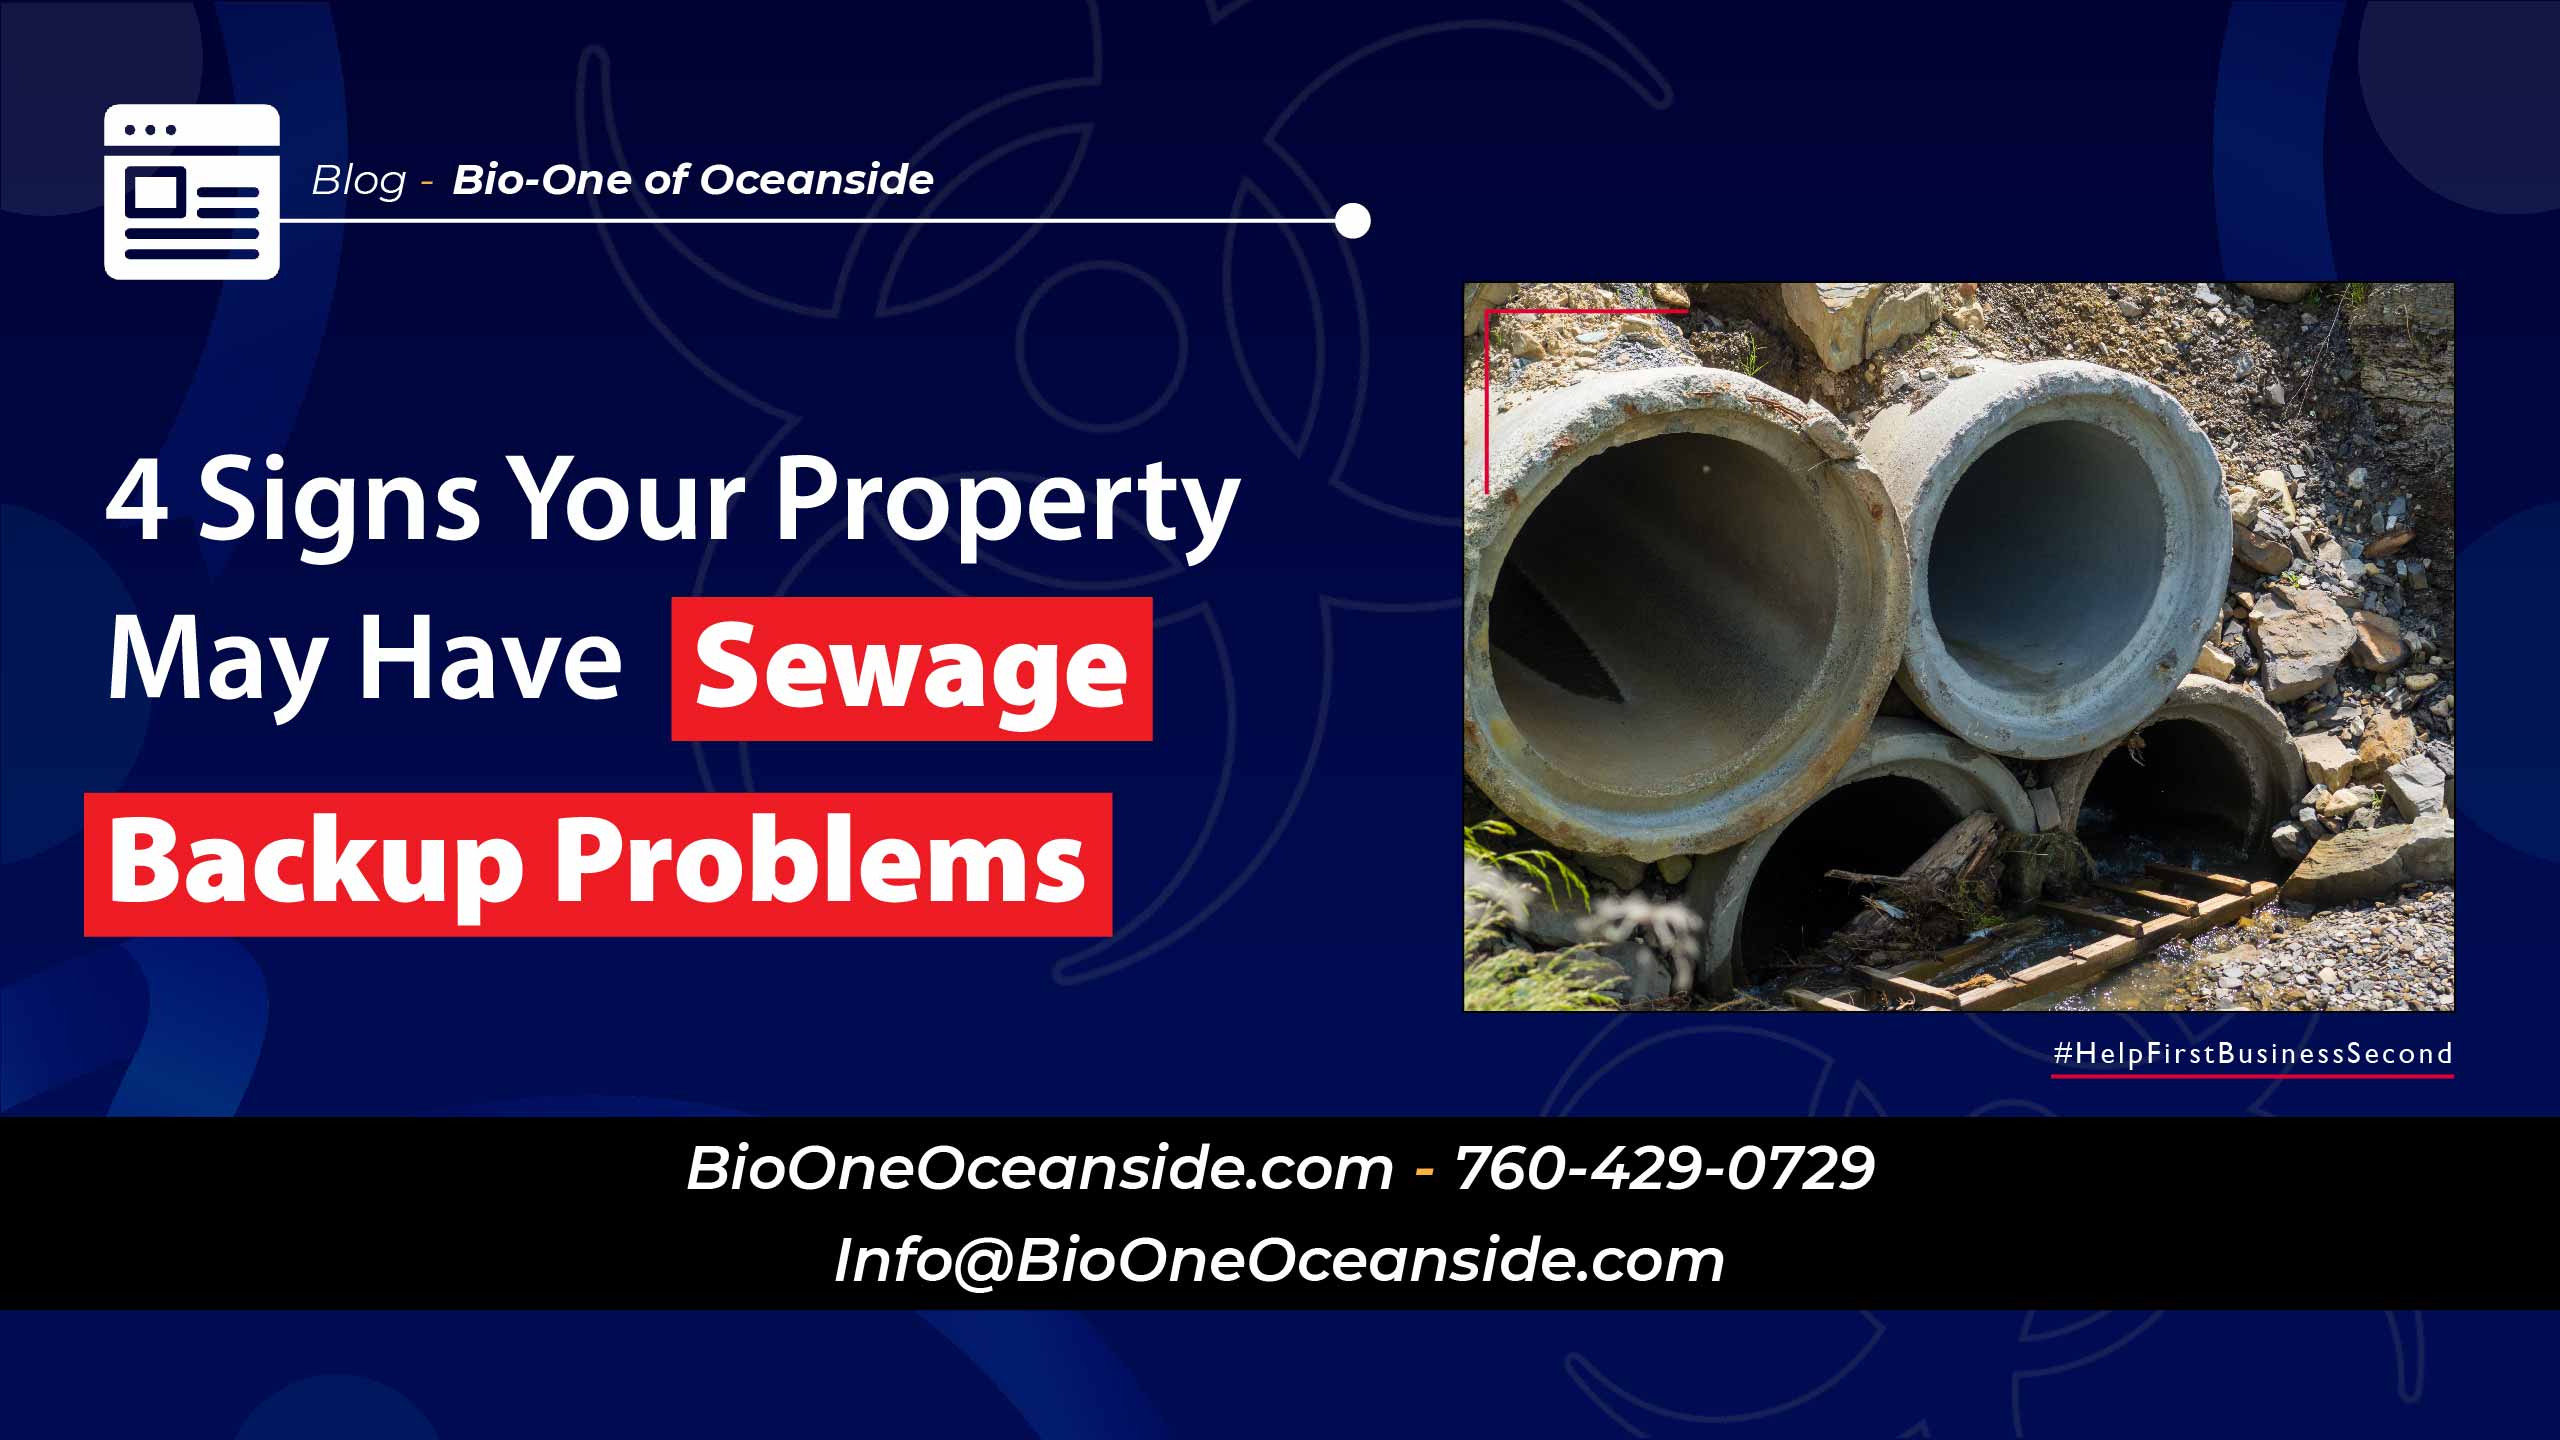 4 Signs Your Property May Have Sewage Backup Problems